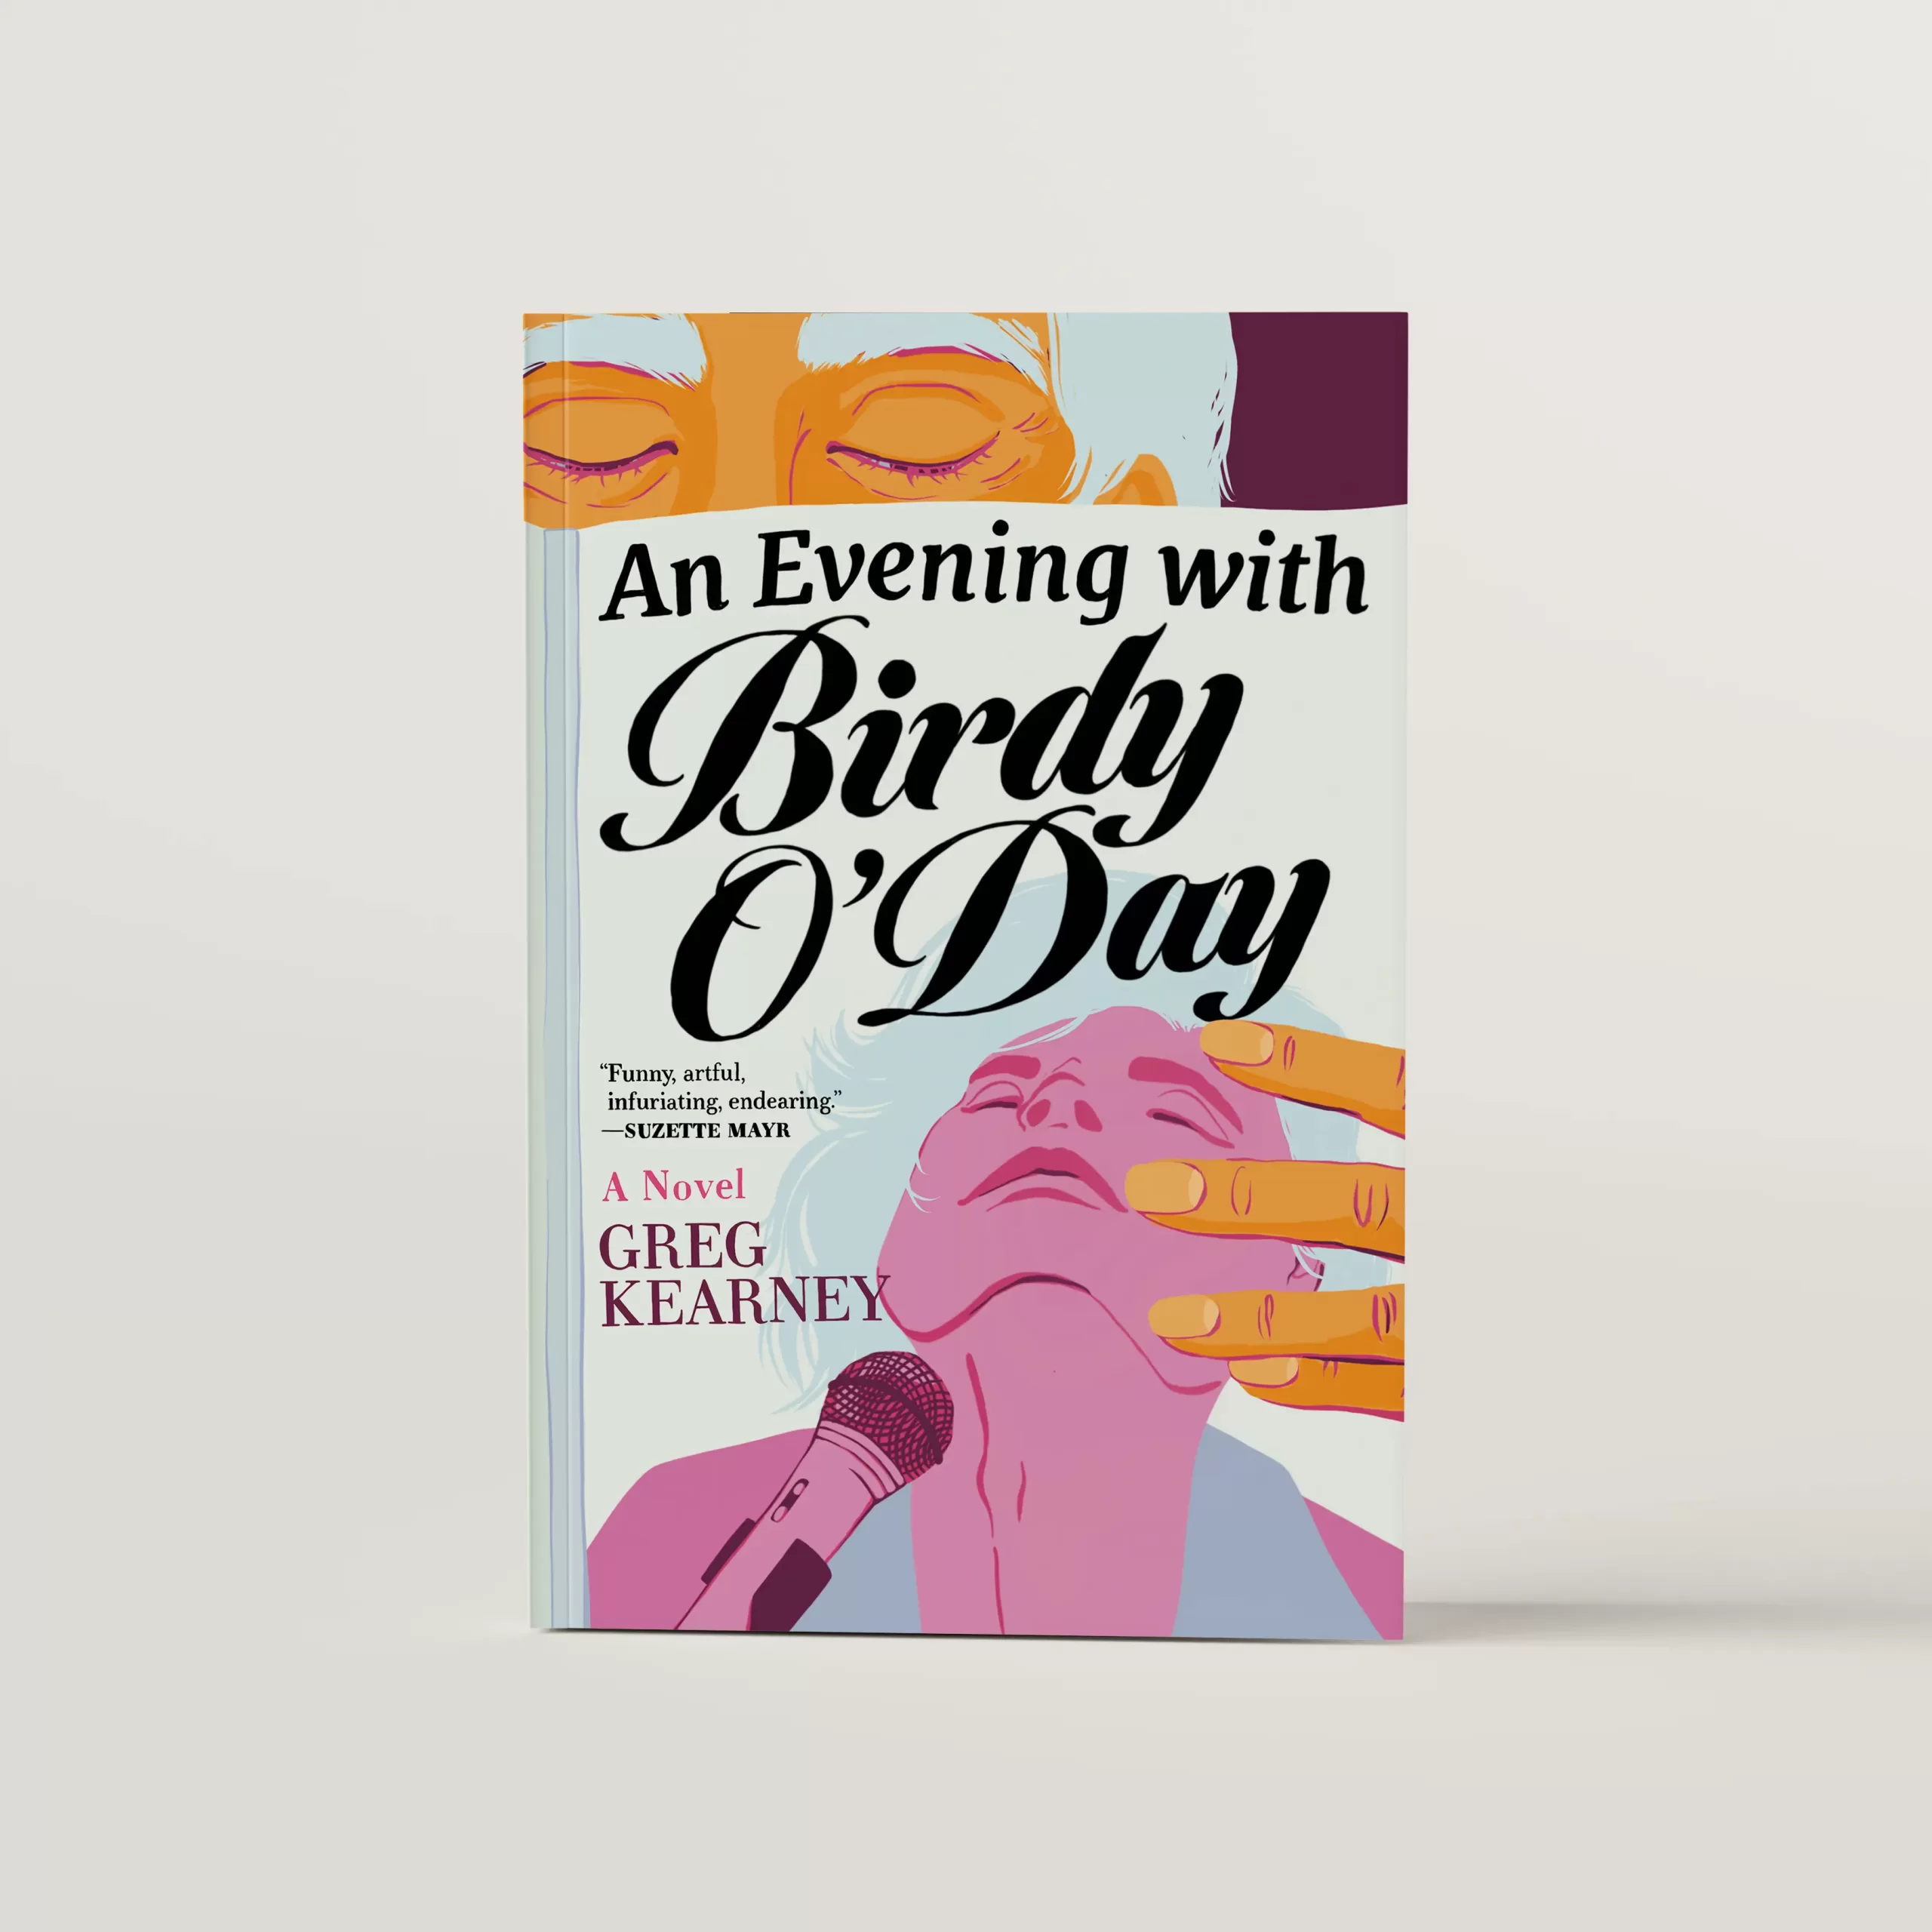 book cover for fiction book, An Evening with Birdy O'Day by Greg Kearney featuring an illustration of an older person reading a magazine. The books title is the front cover of the magazine.